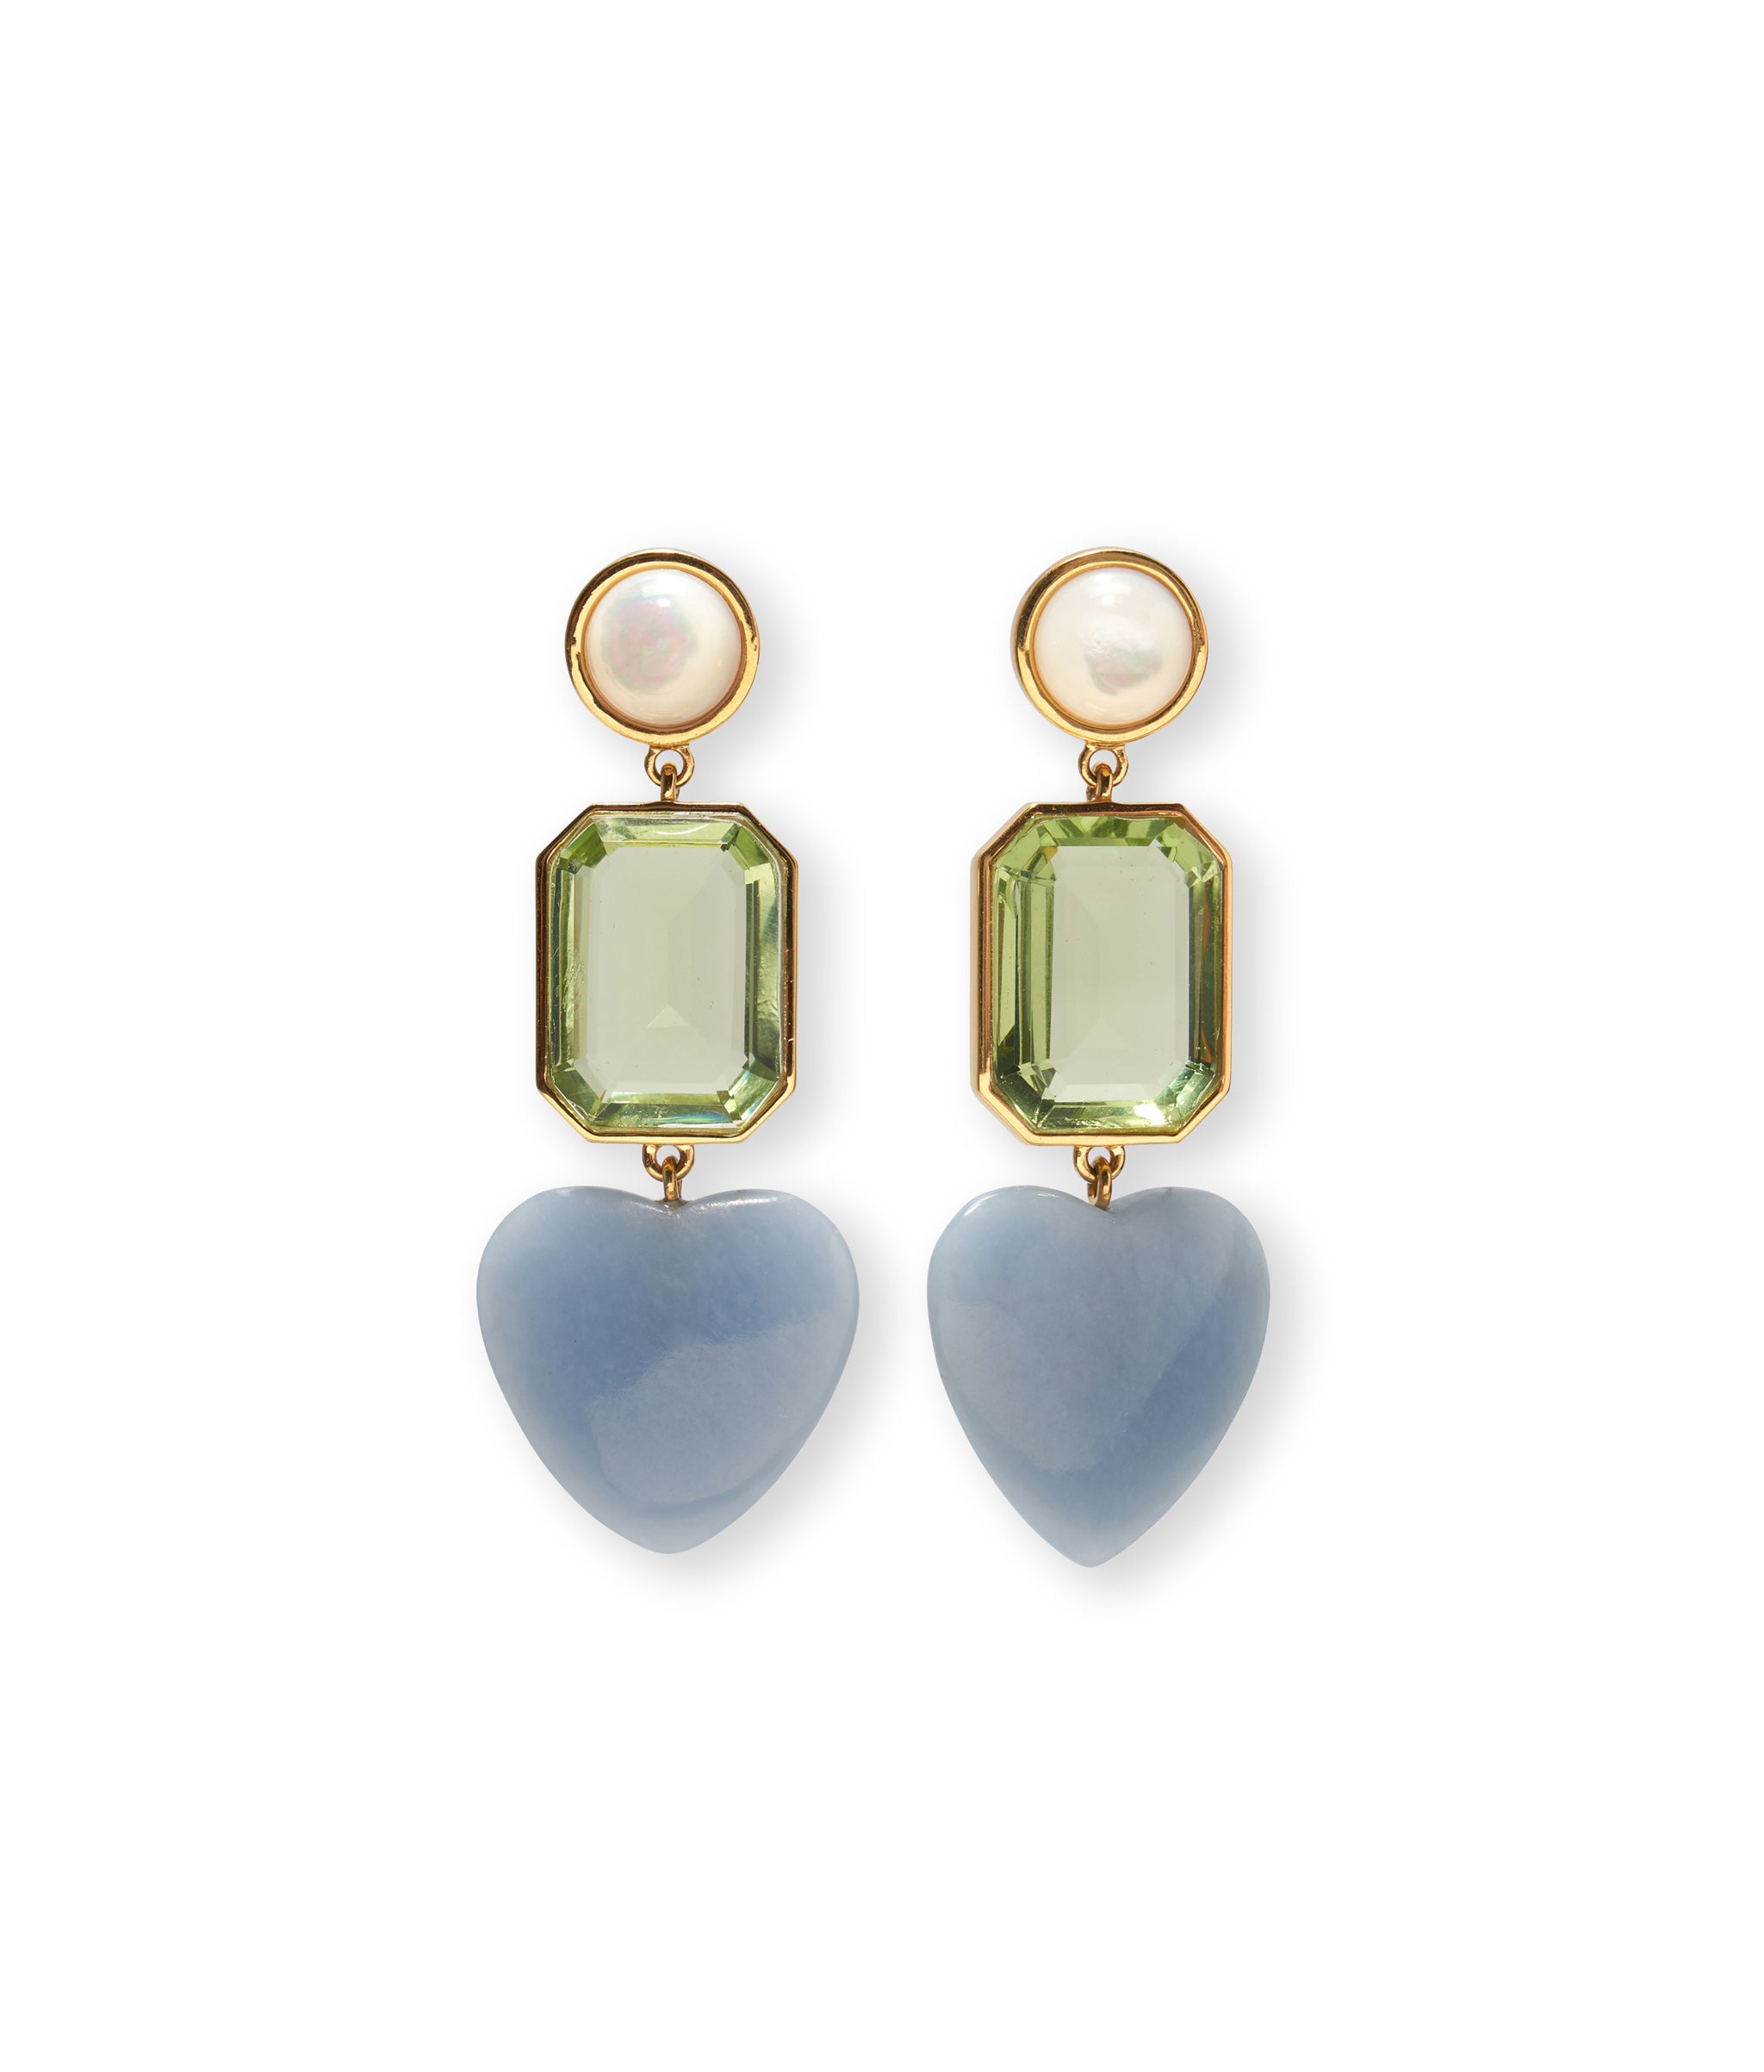 Demy Earrings in Azul. Gold-plated brass, mother-of-pearl tops, green quartz baguettes, and carved blue angelite hearts.